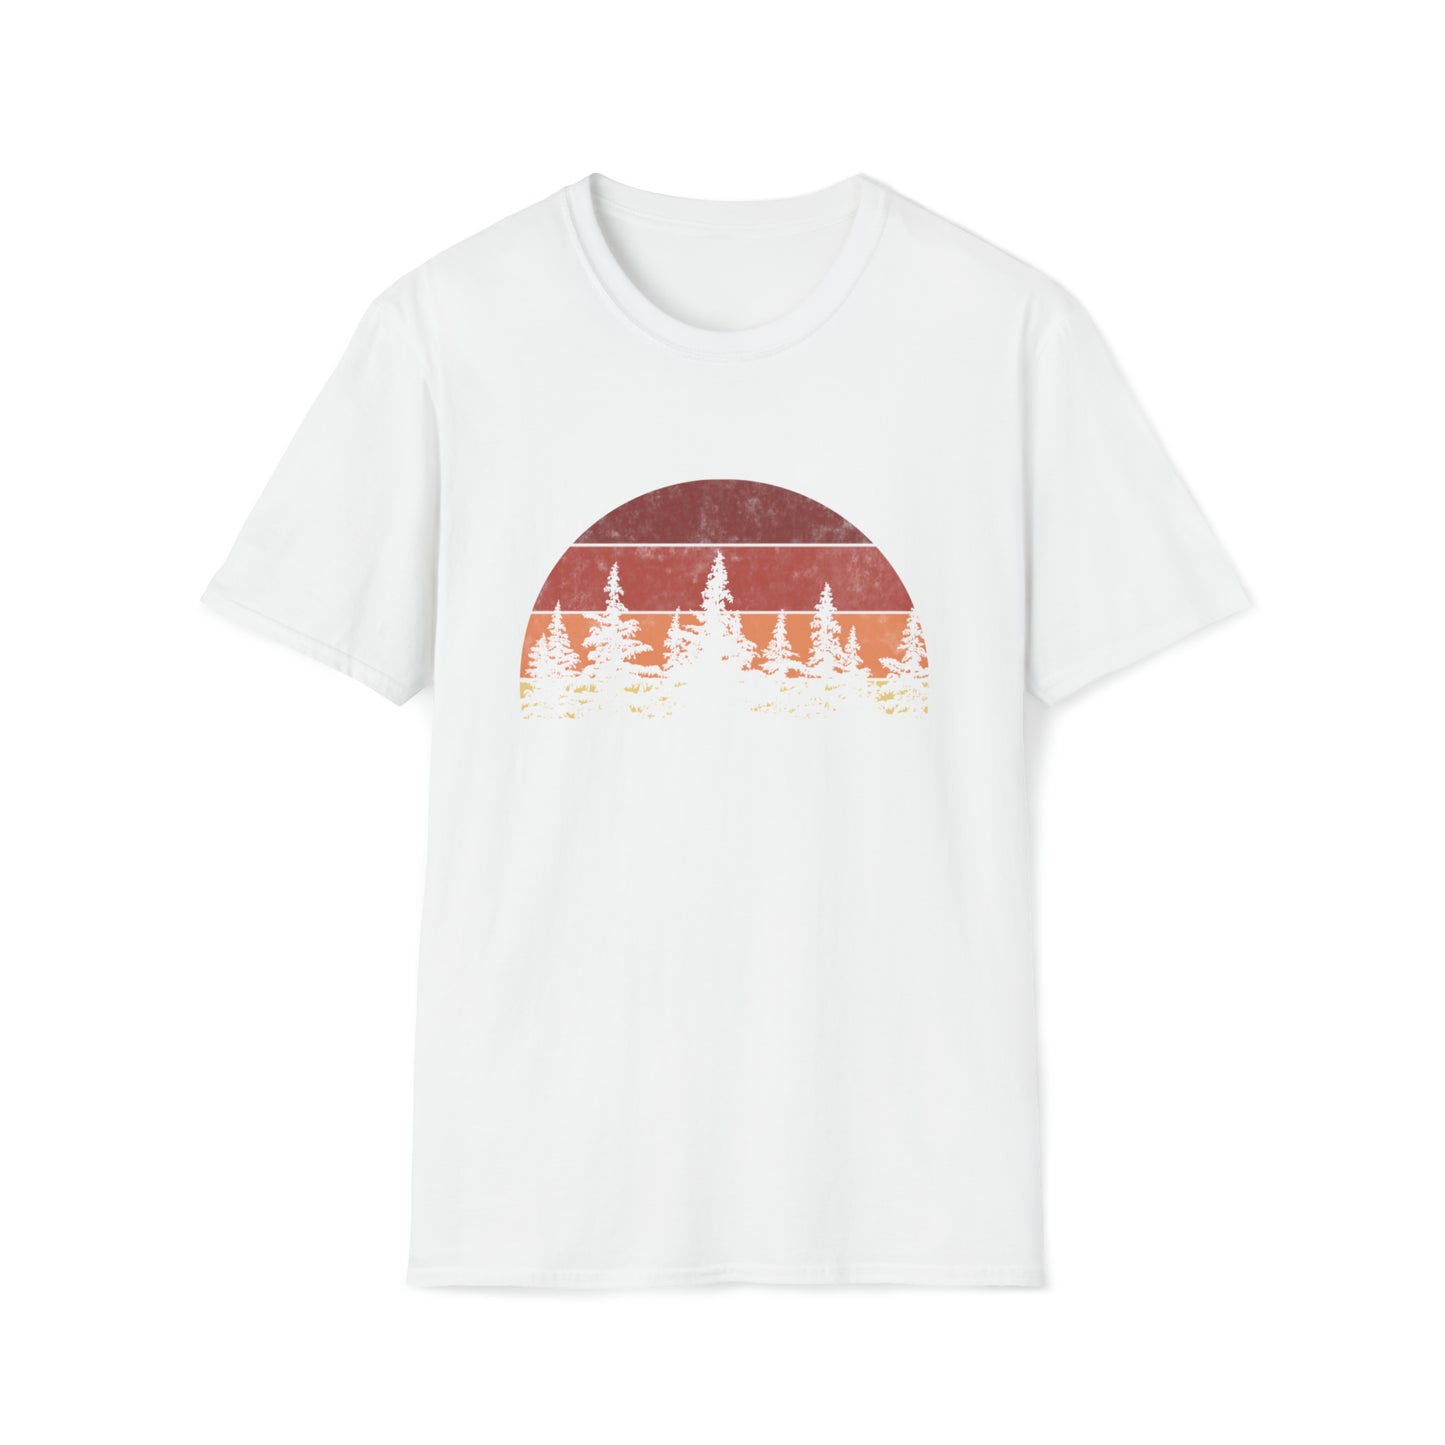 Softstyle T-Shirt, I'd Rather Be Camping, Retro Sunset Trees